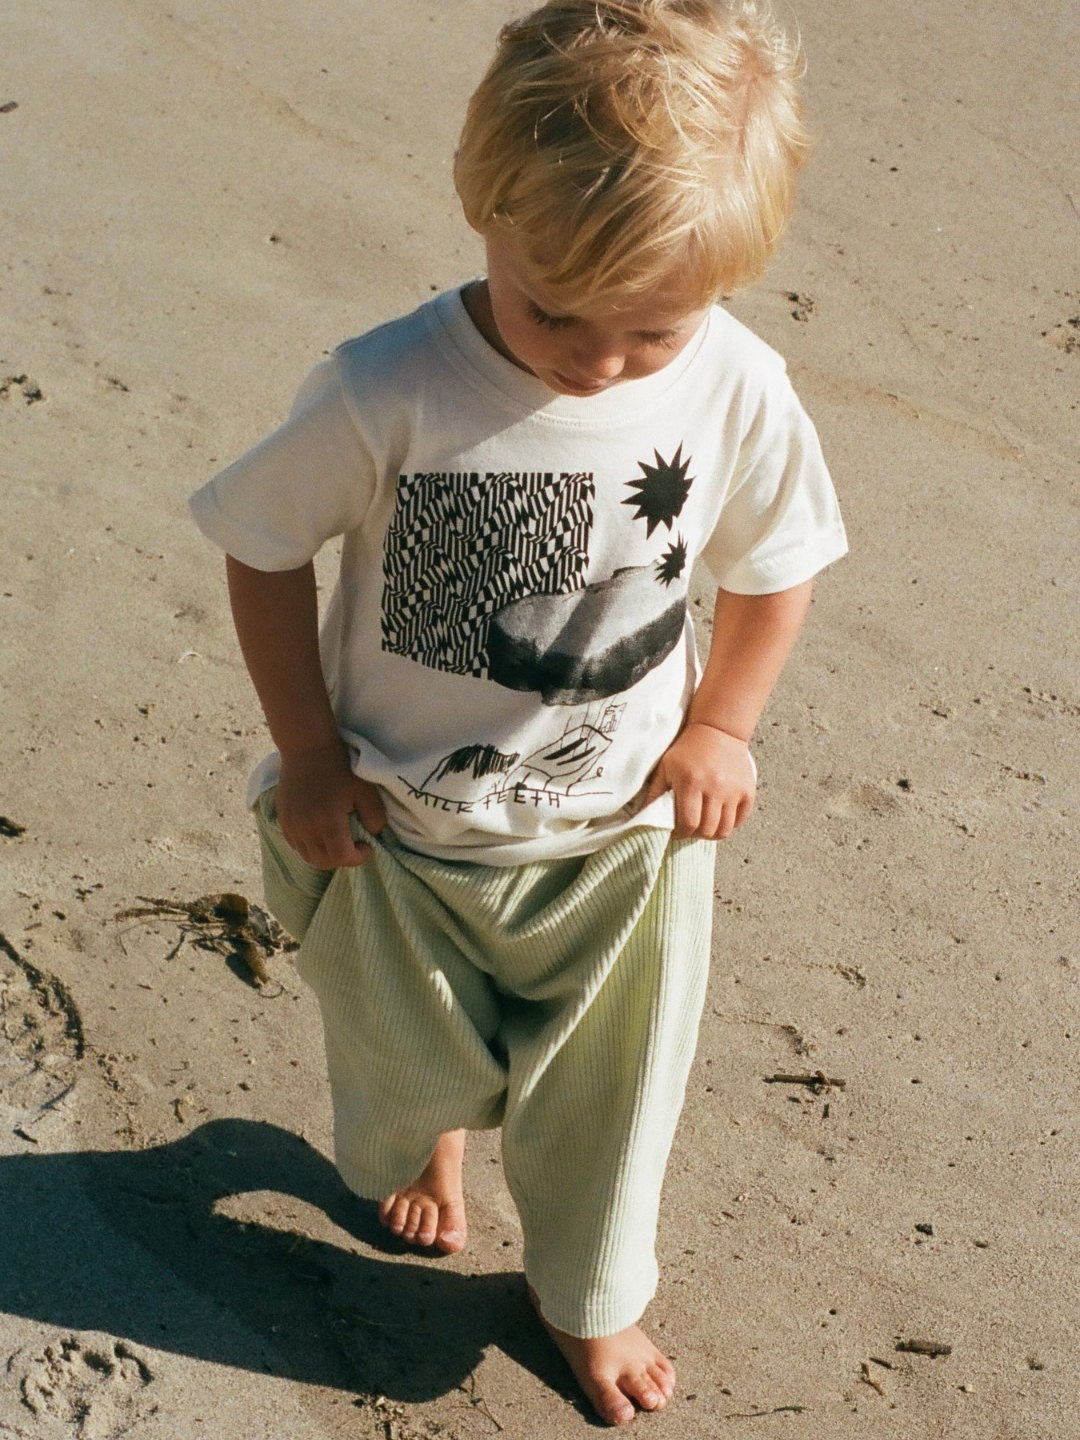 A child on a beach wearing a kids' tee shirt in cream, printed in black with patterns, stars, a PBJ sandwich and the words Milk Teeth